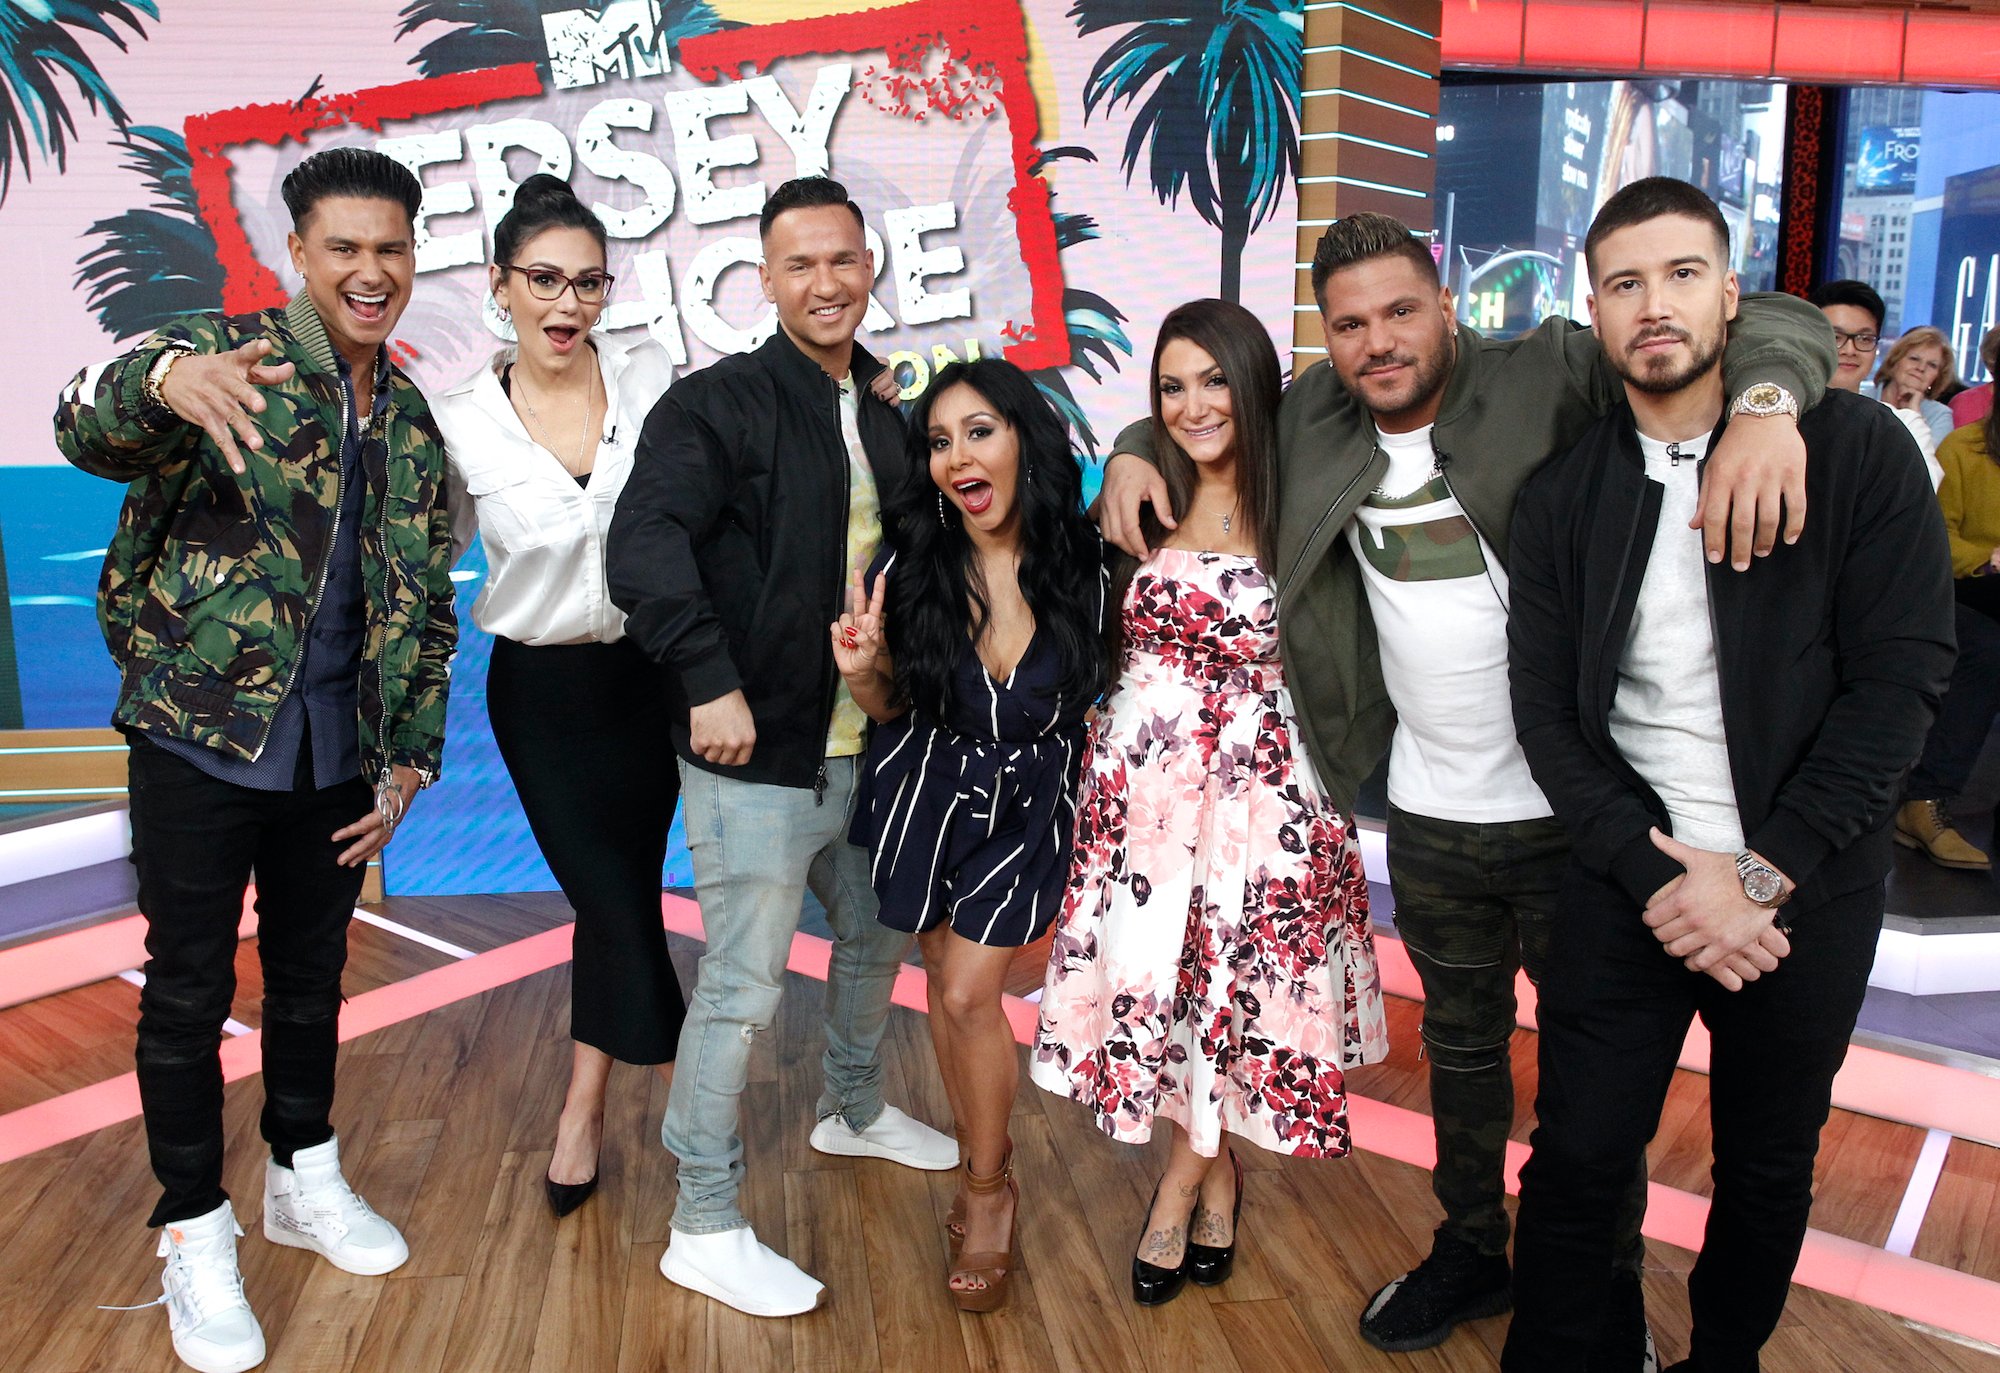 The cast of "Jersey Shore" are guests on "Good Morning America," Tuesday, March 27, 2018